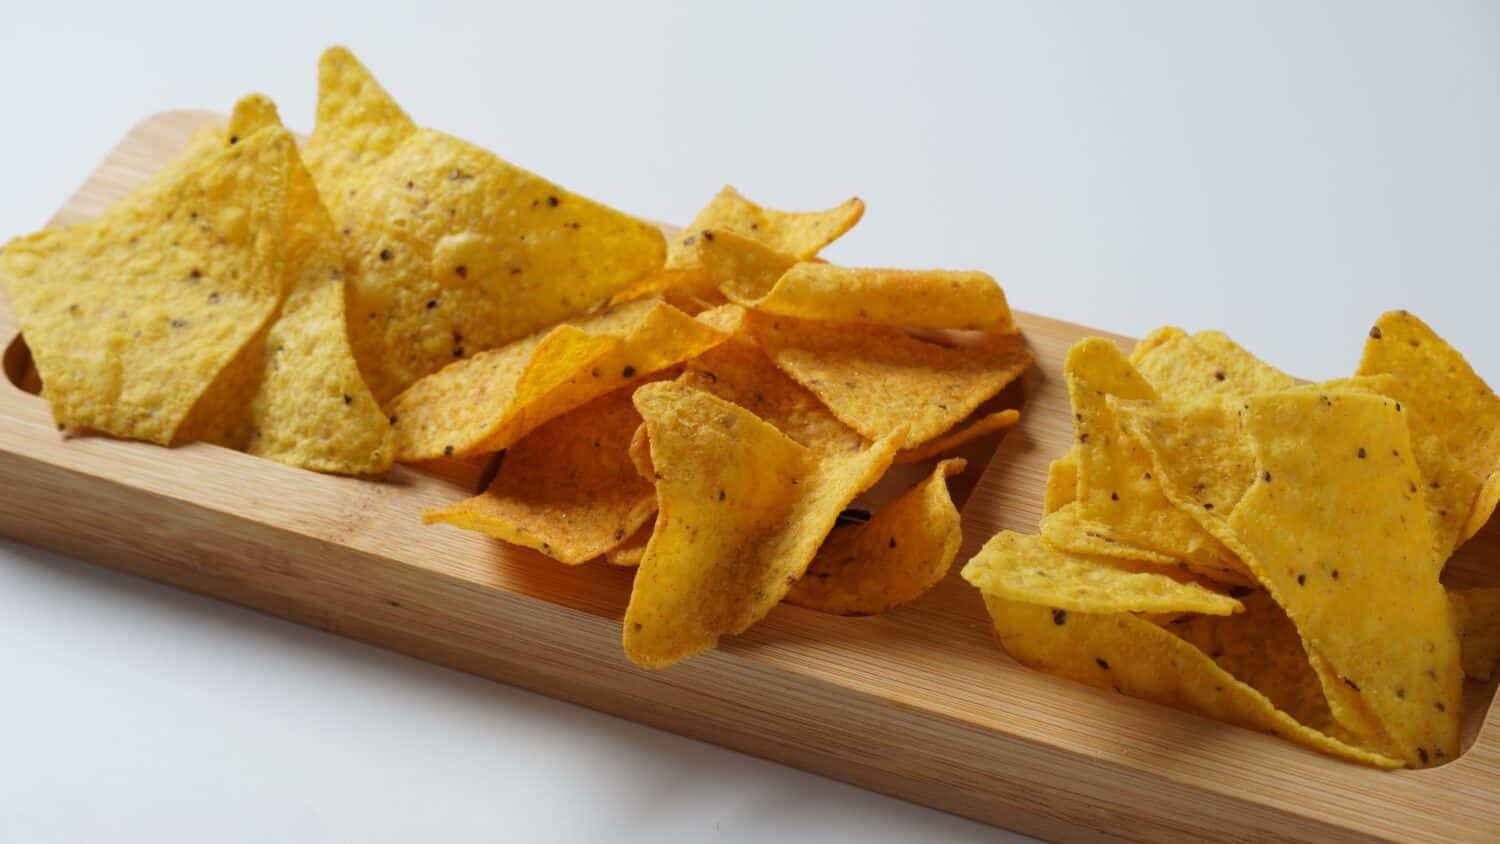 Doritos is an American brand of flavored tortilla chips. Corn chips doritos spiced on a a wooden board.